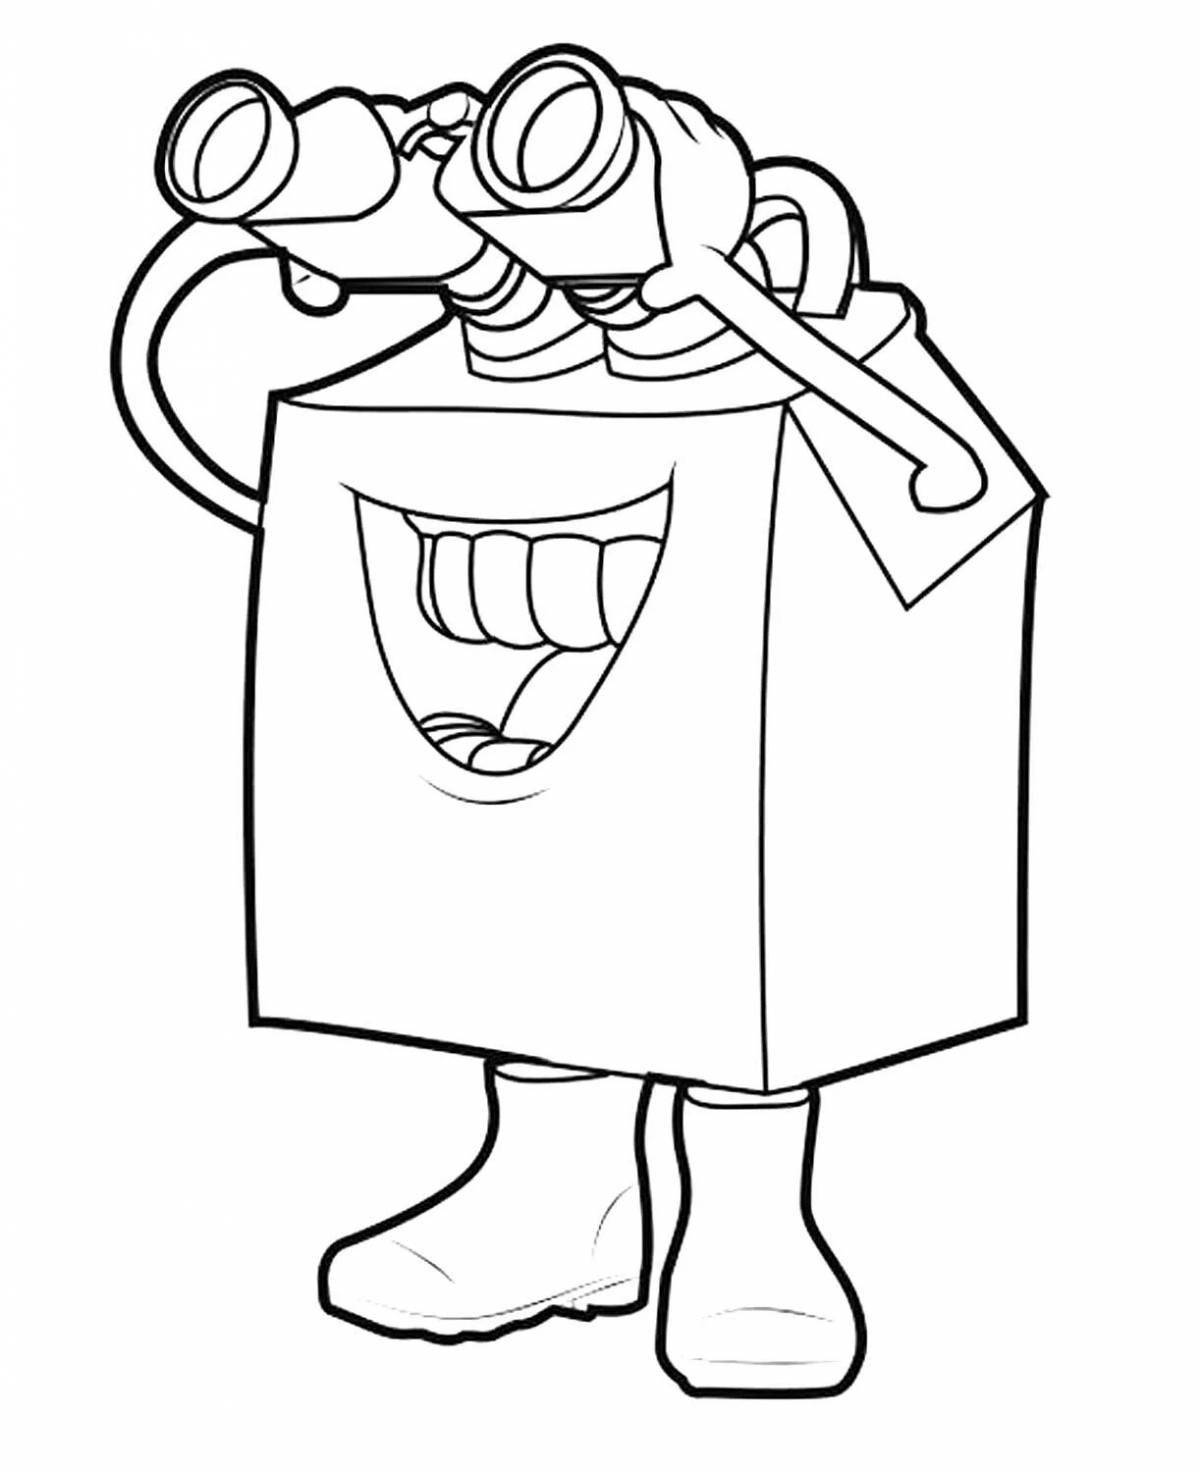 Stimulated happy meal coloring page